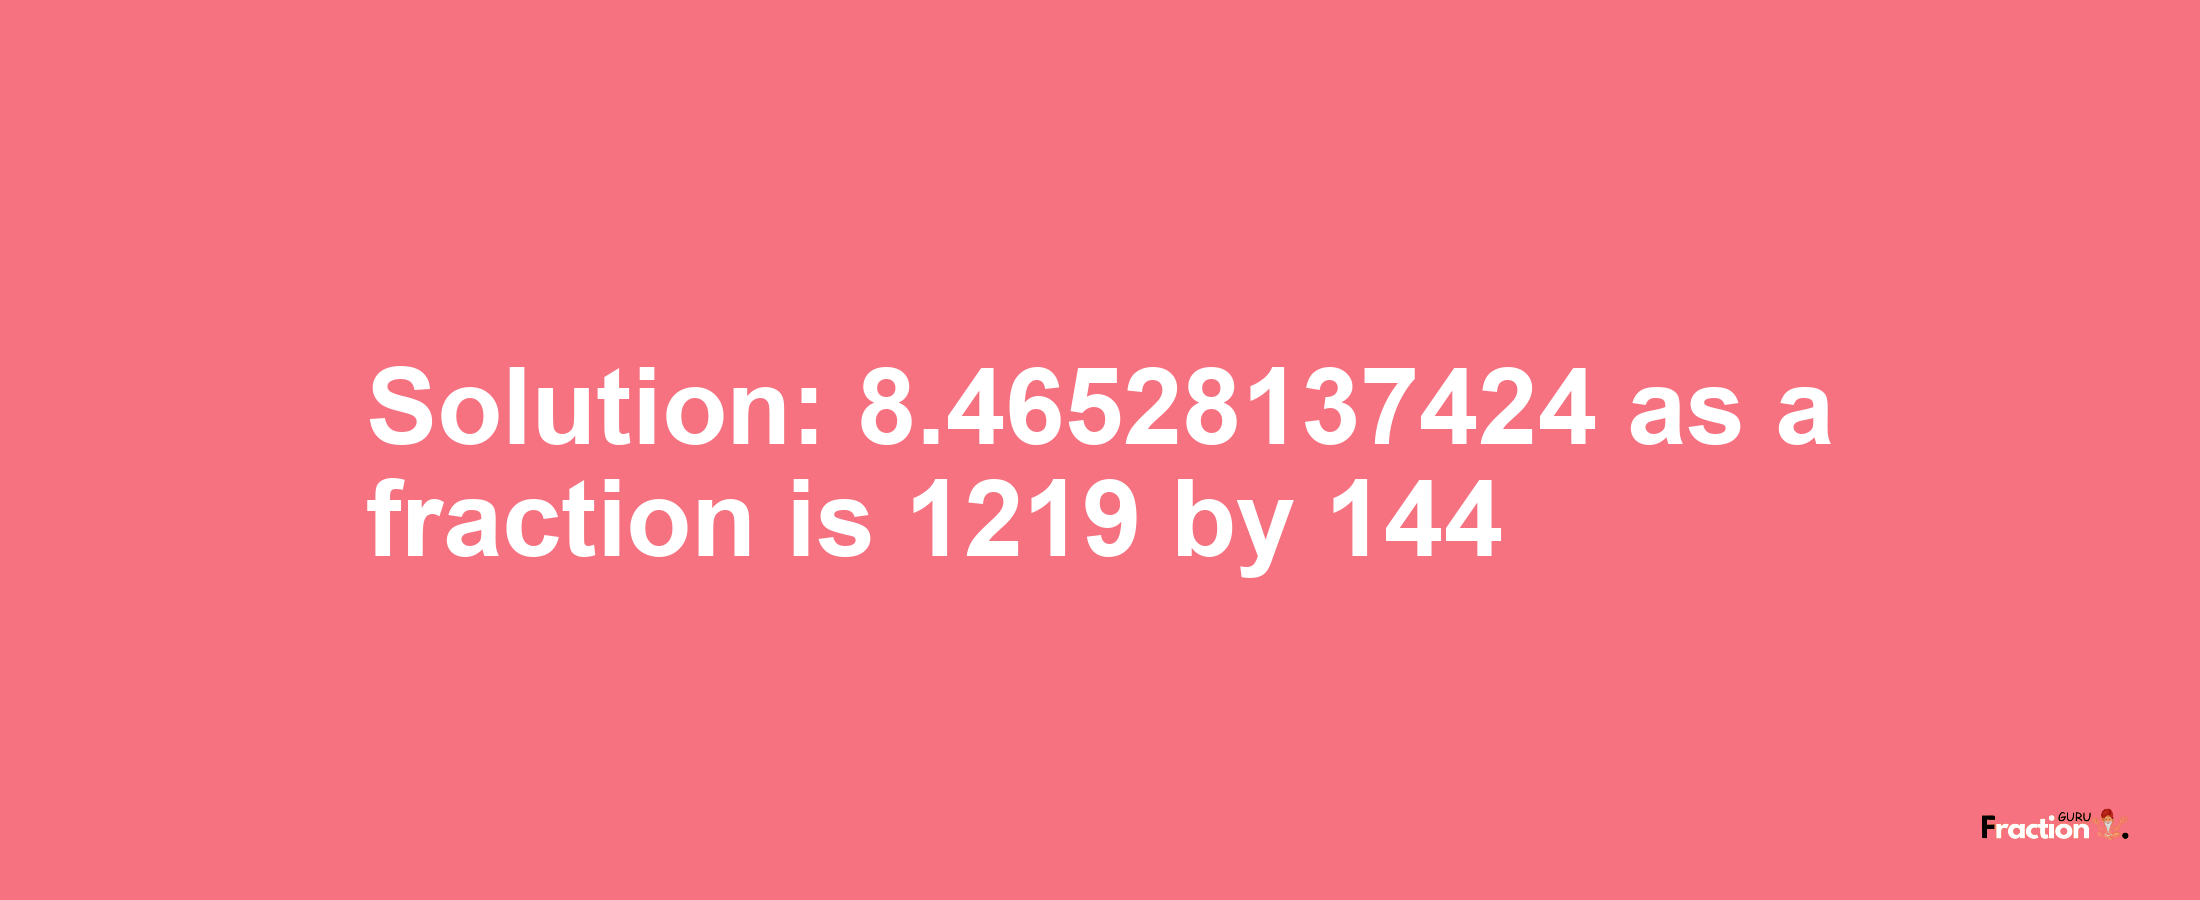 Solution:8.46528137424 as a fraction is 1219/144